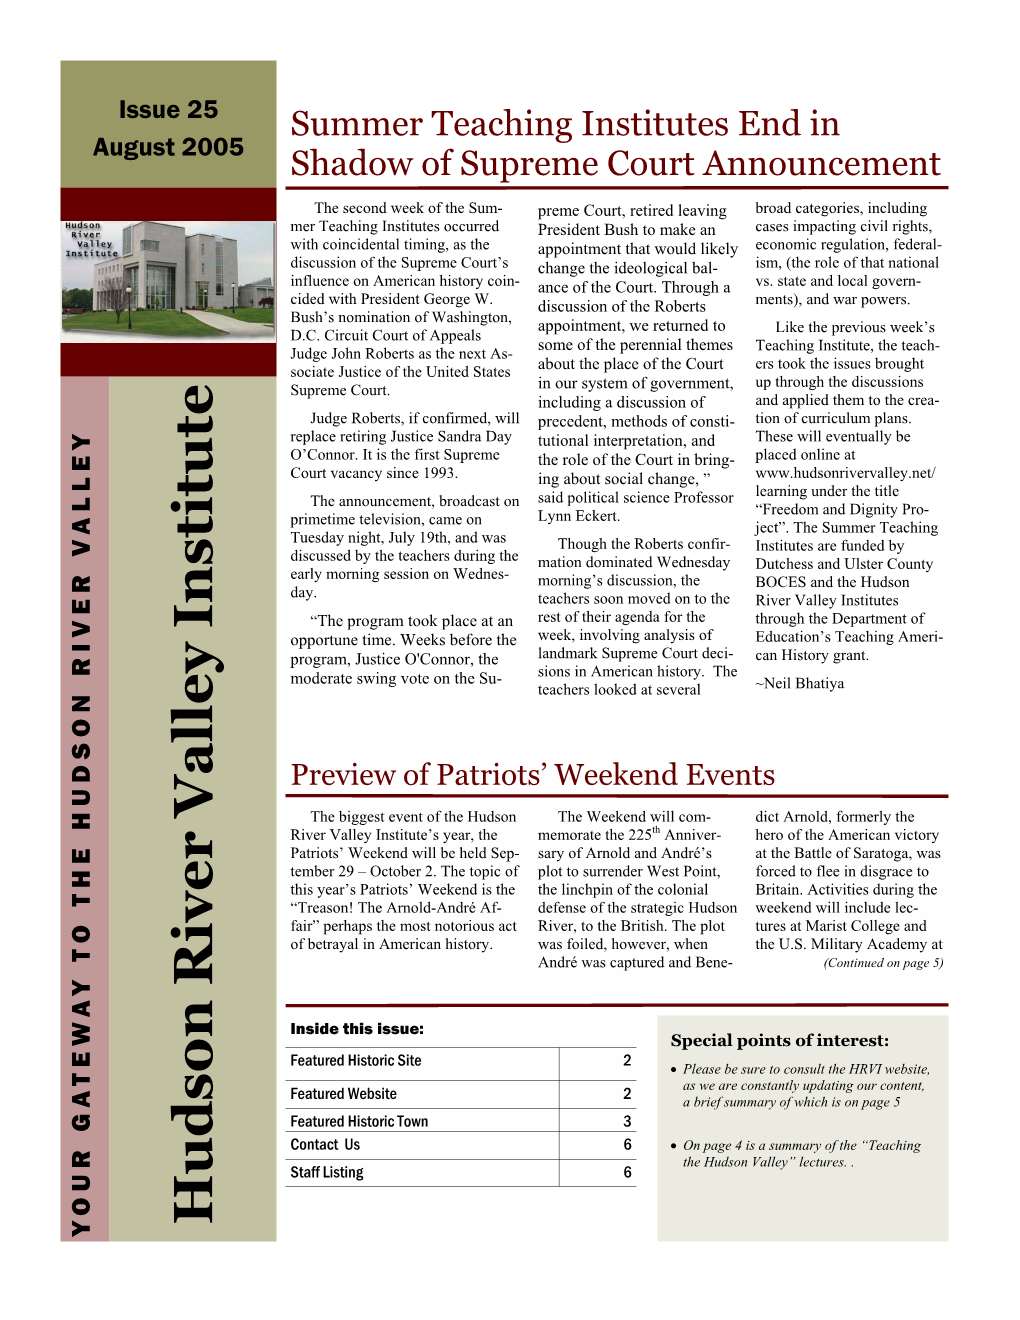 August 2005 Shadow of Supreme Court Announcement